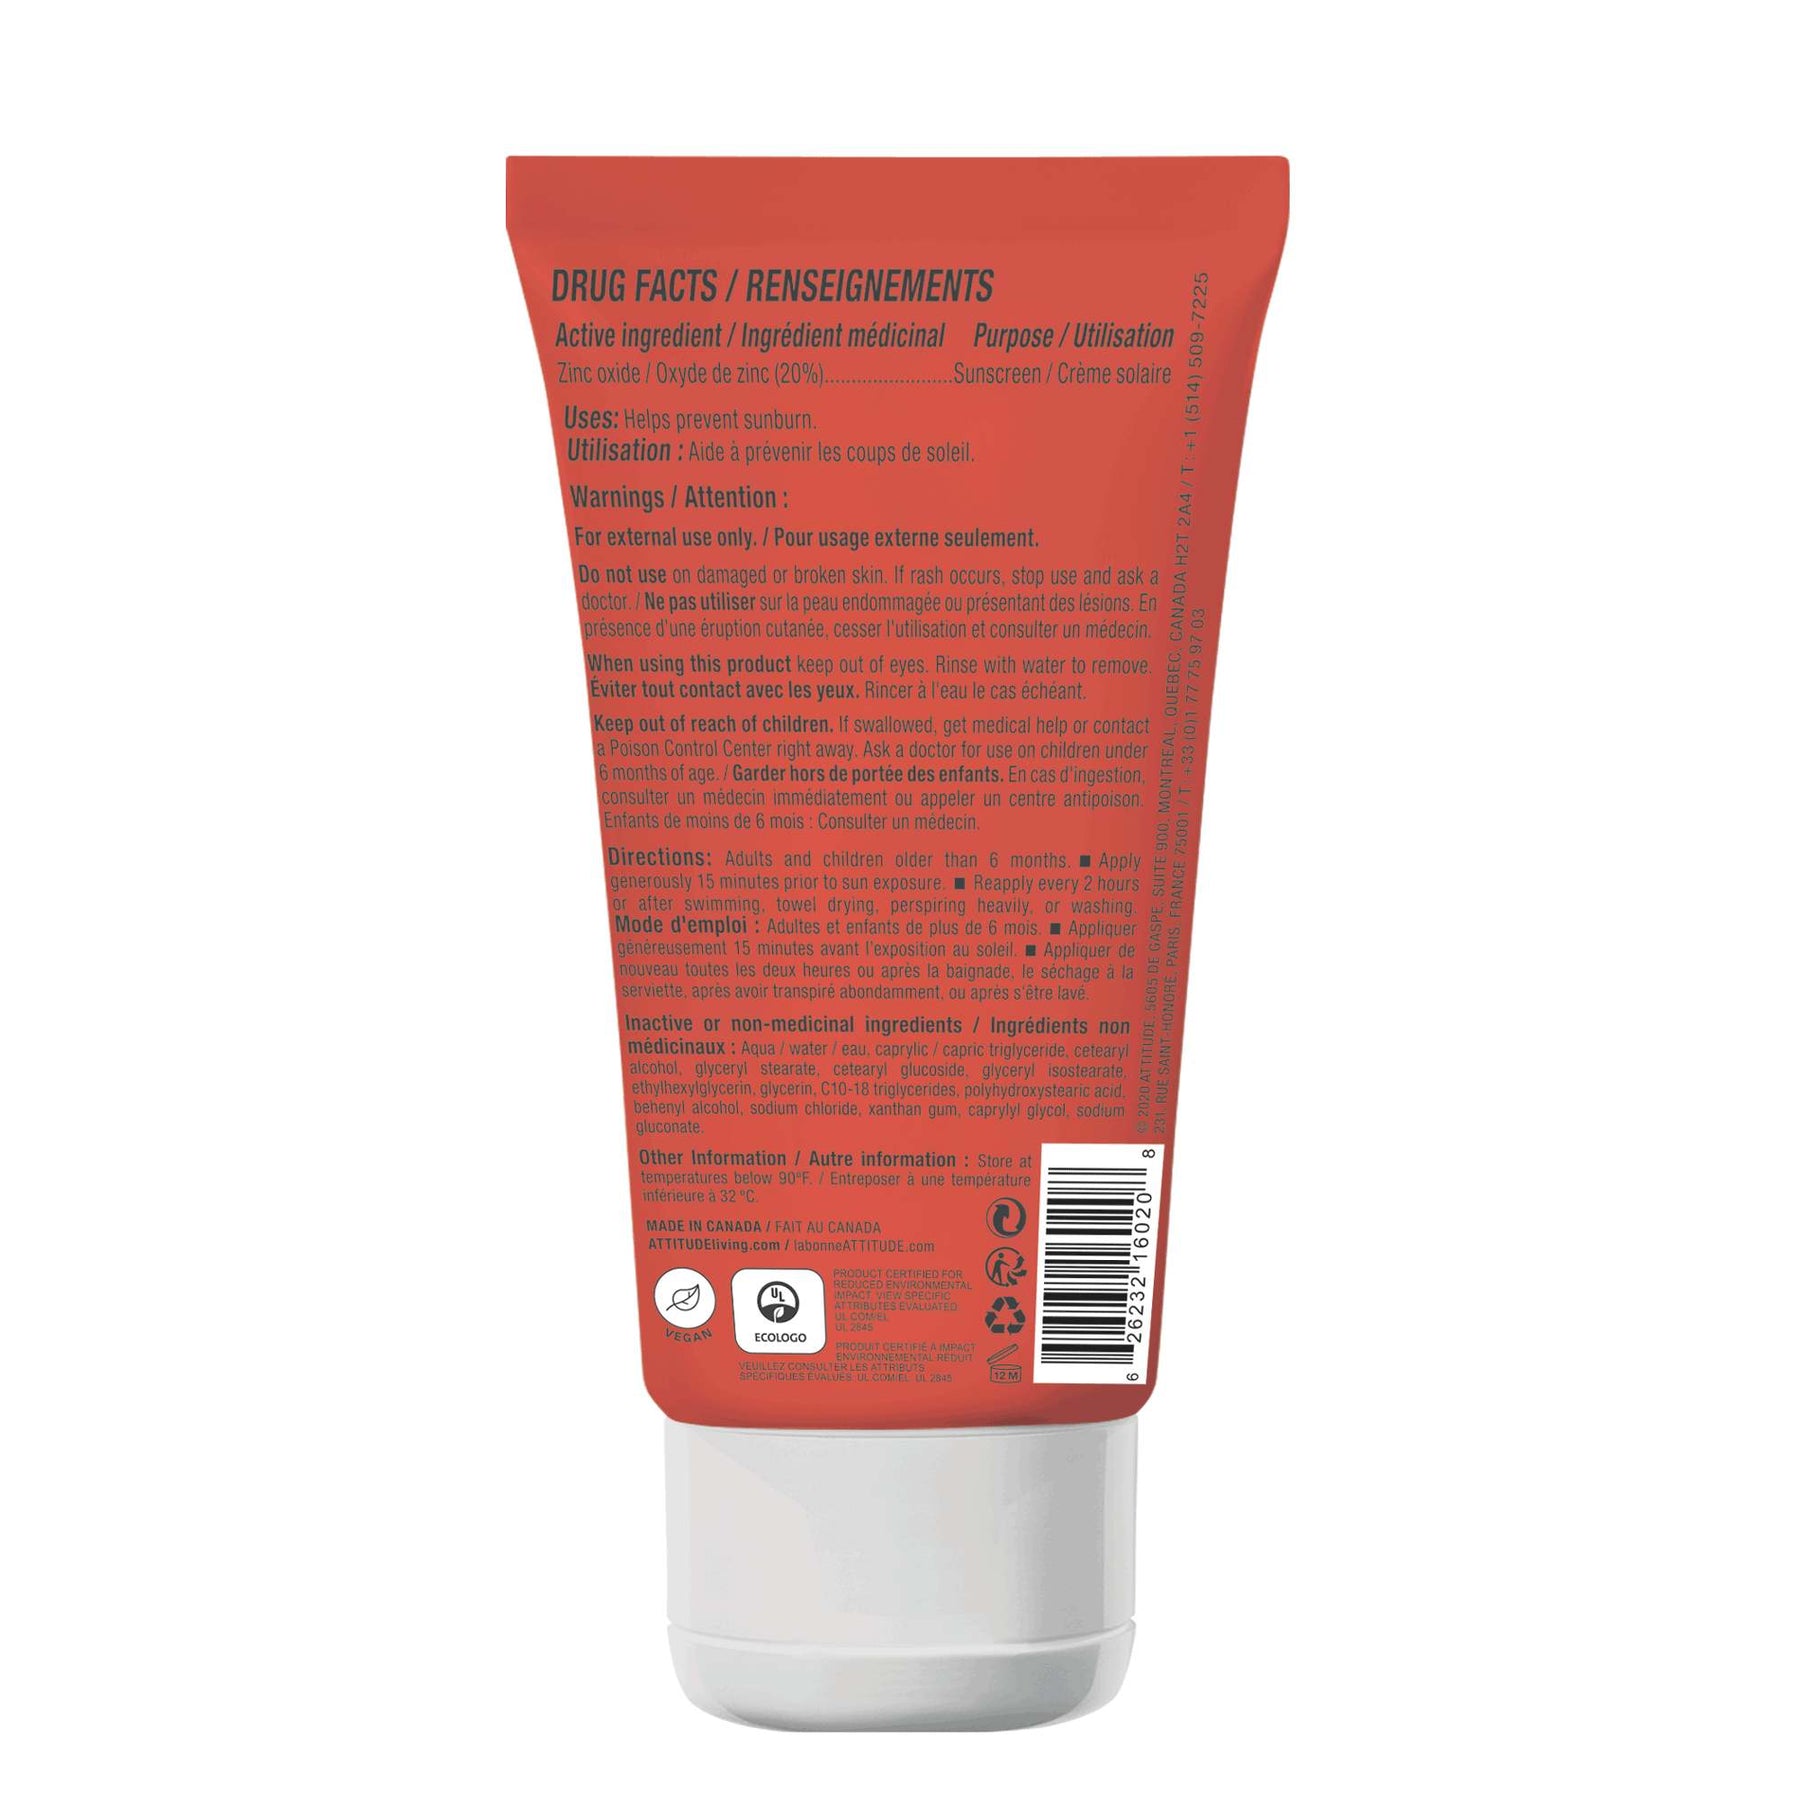 Moisturizer Mineral Sunscreen : SPF 30 - by ATTITUDE |ProCare Outlet|